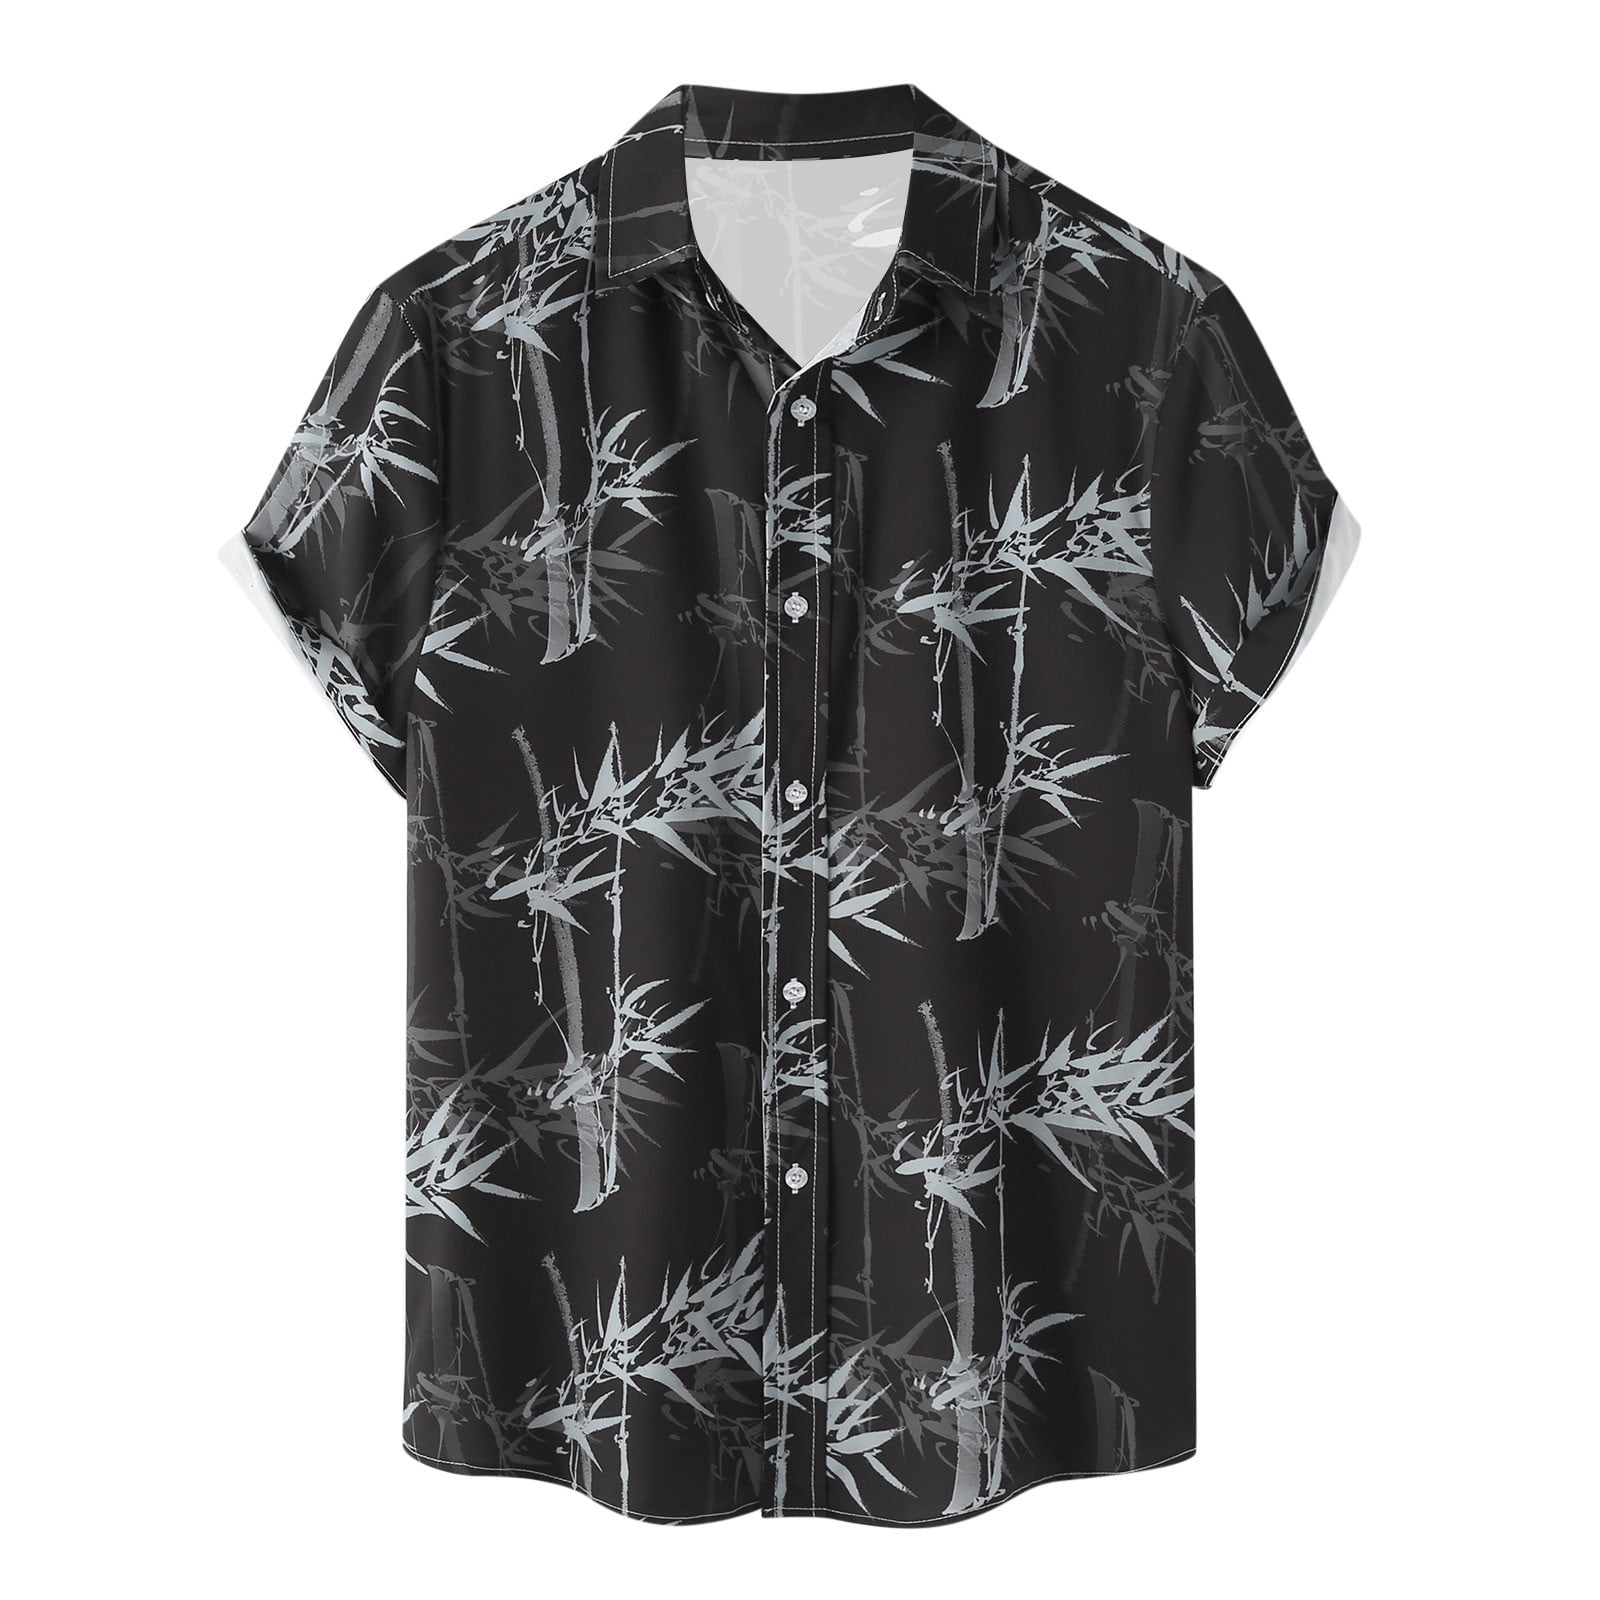 ZCFZJW Tropical Beach Shirts for Men Hawaiian Style Casual Short Sleeve  Button Down Palm Tree Print T Shirts Regular Fit Holiday Gift Tops Dark  Gray